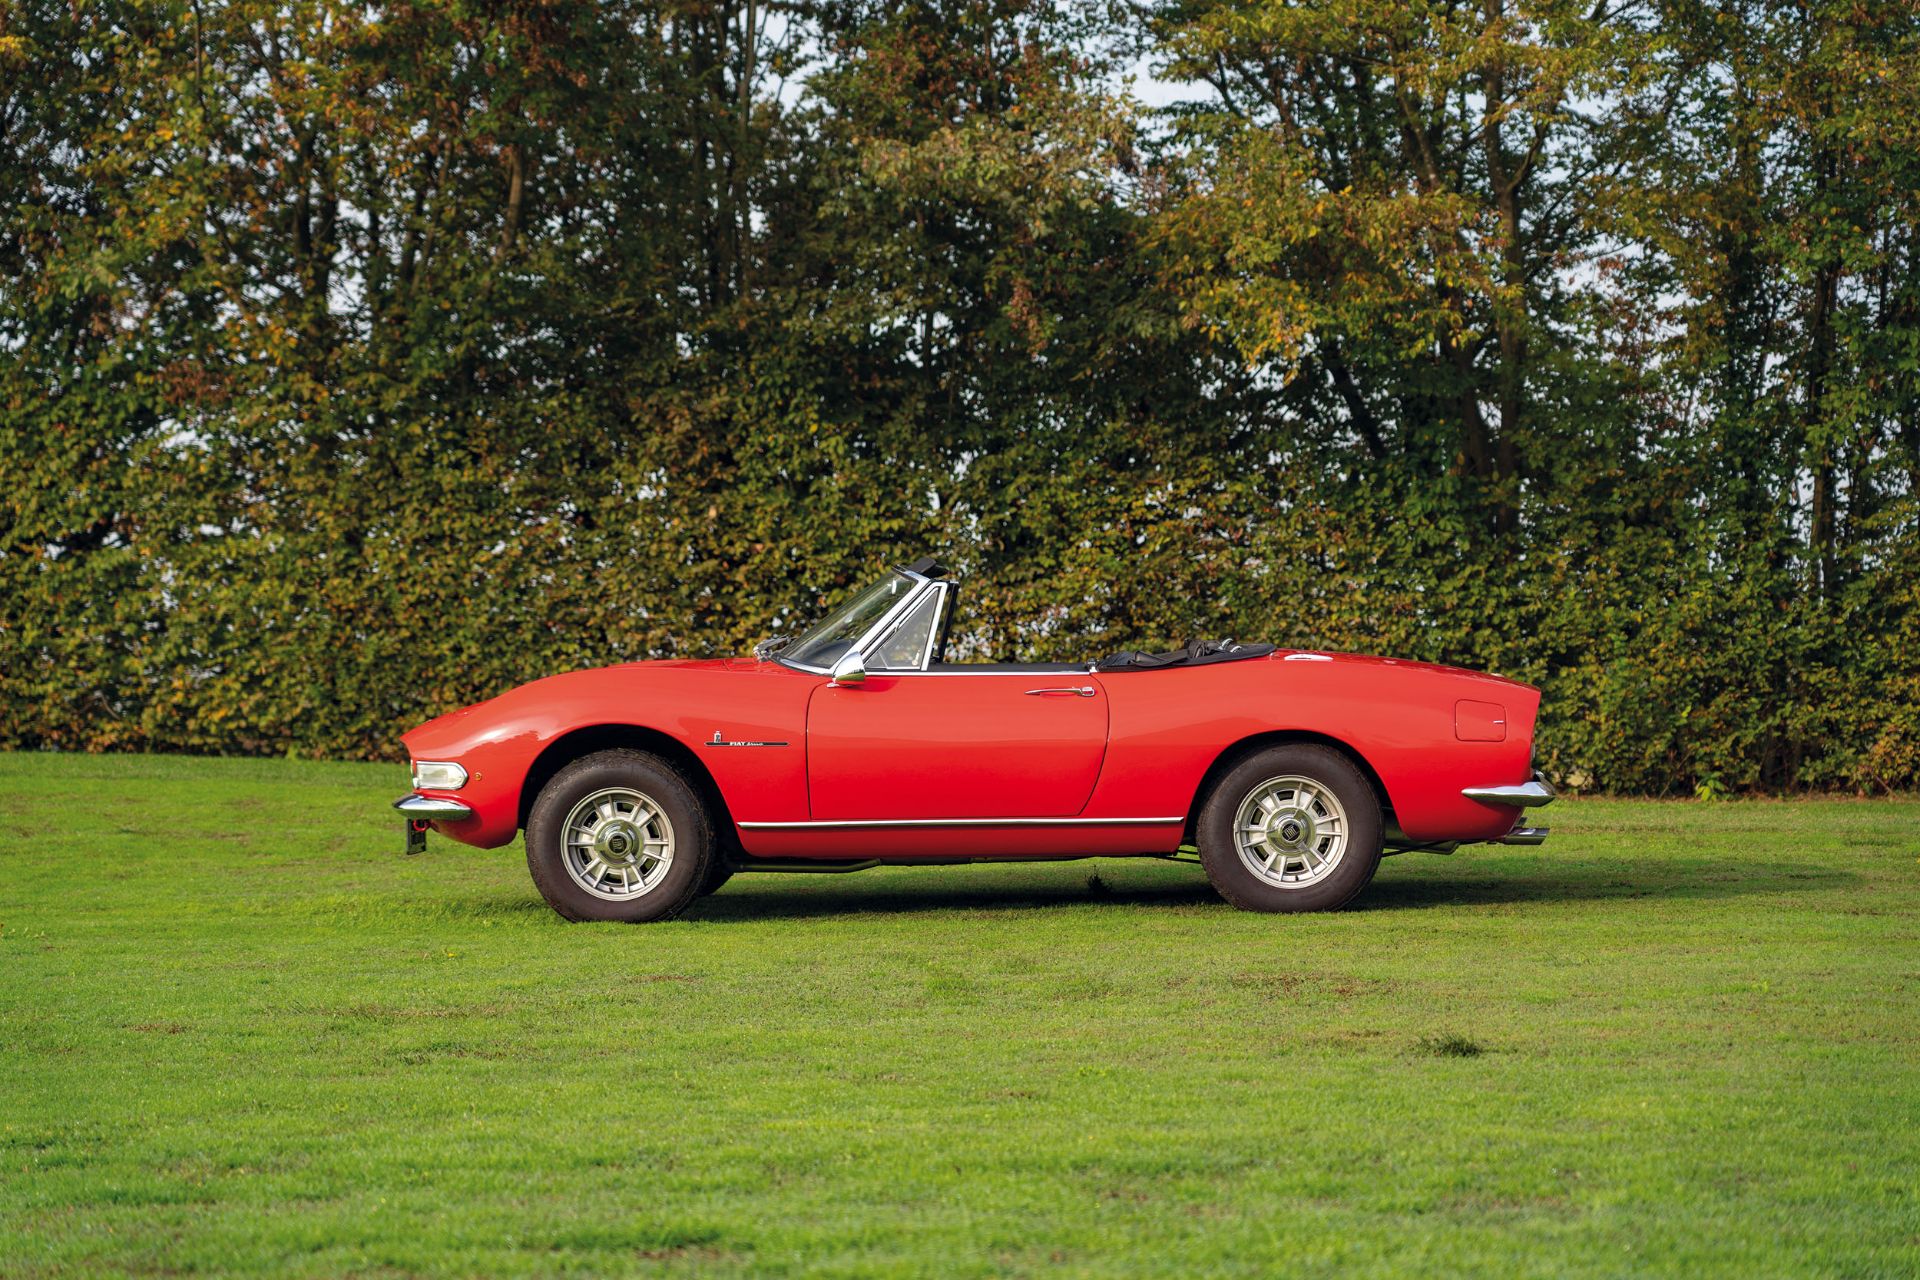 1967 FIAT DINO SPIDER 2000 (TIPO 135 AS) - Image 2 of 6